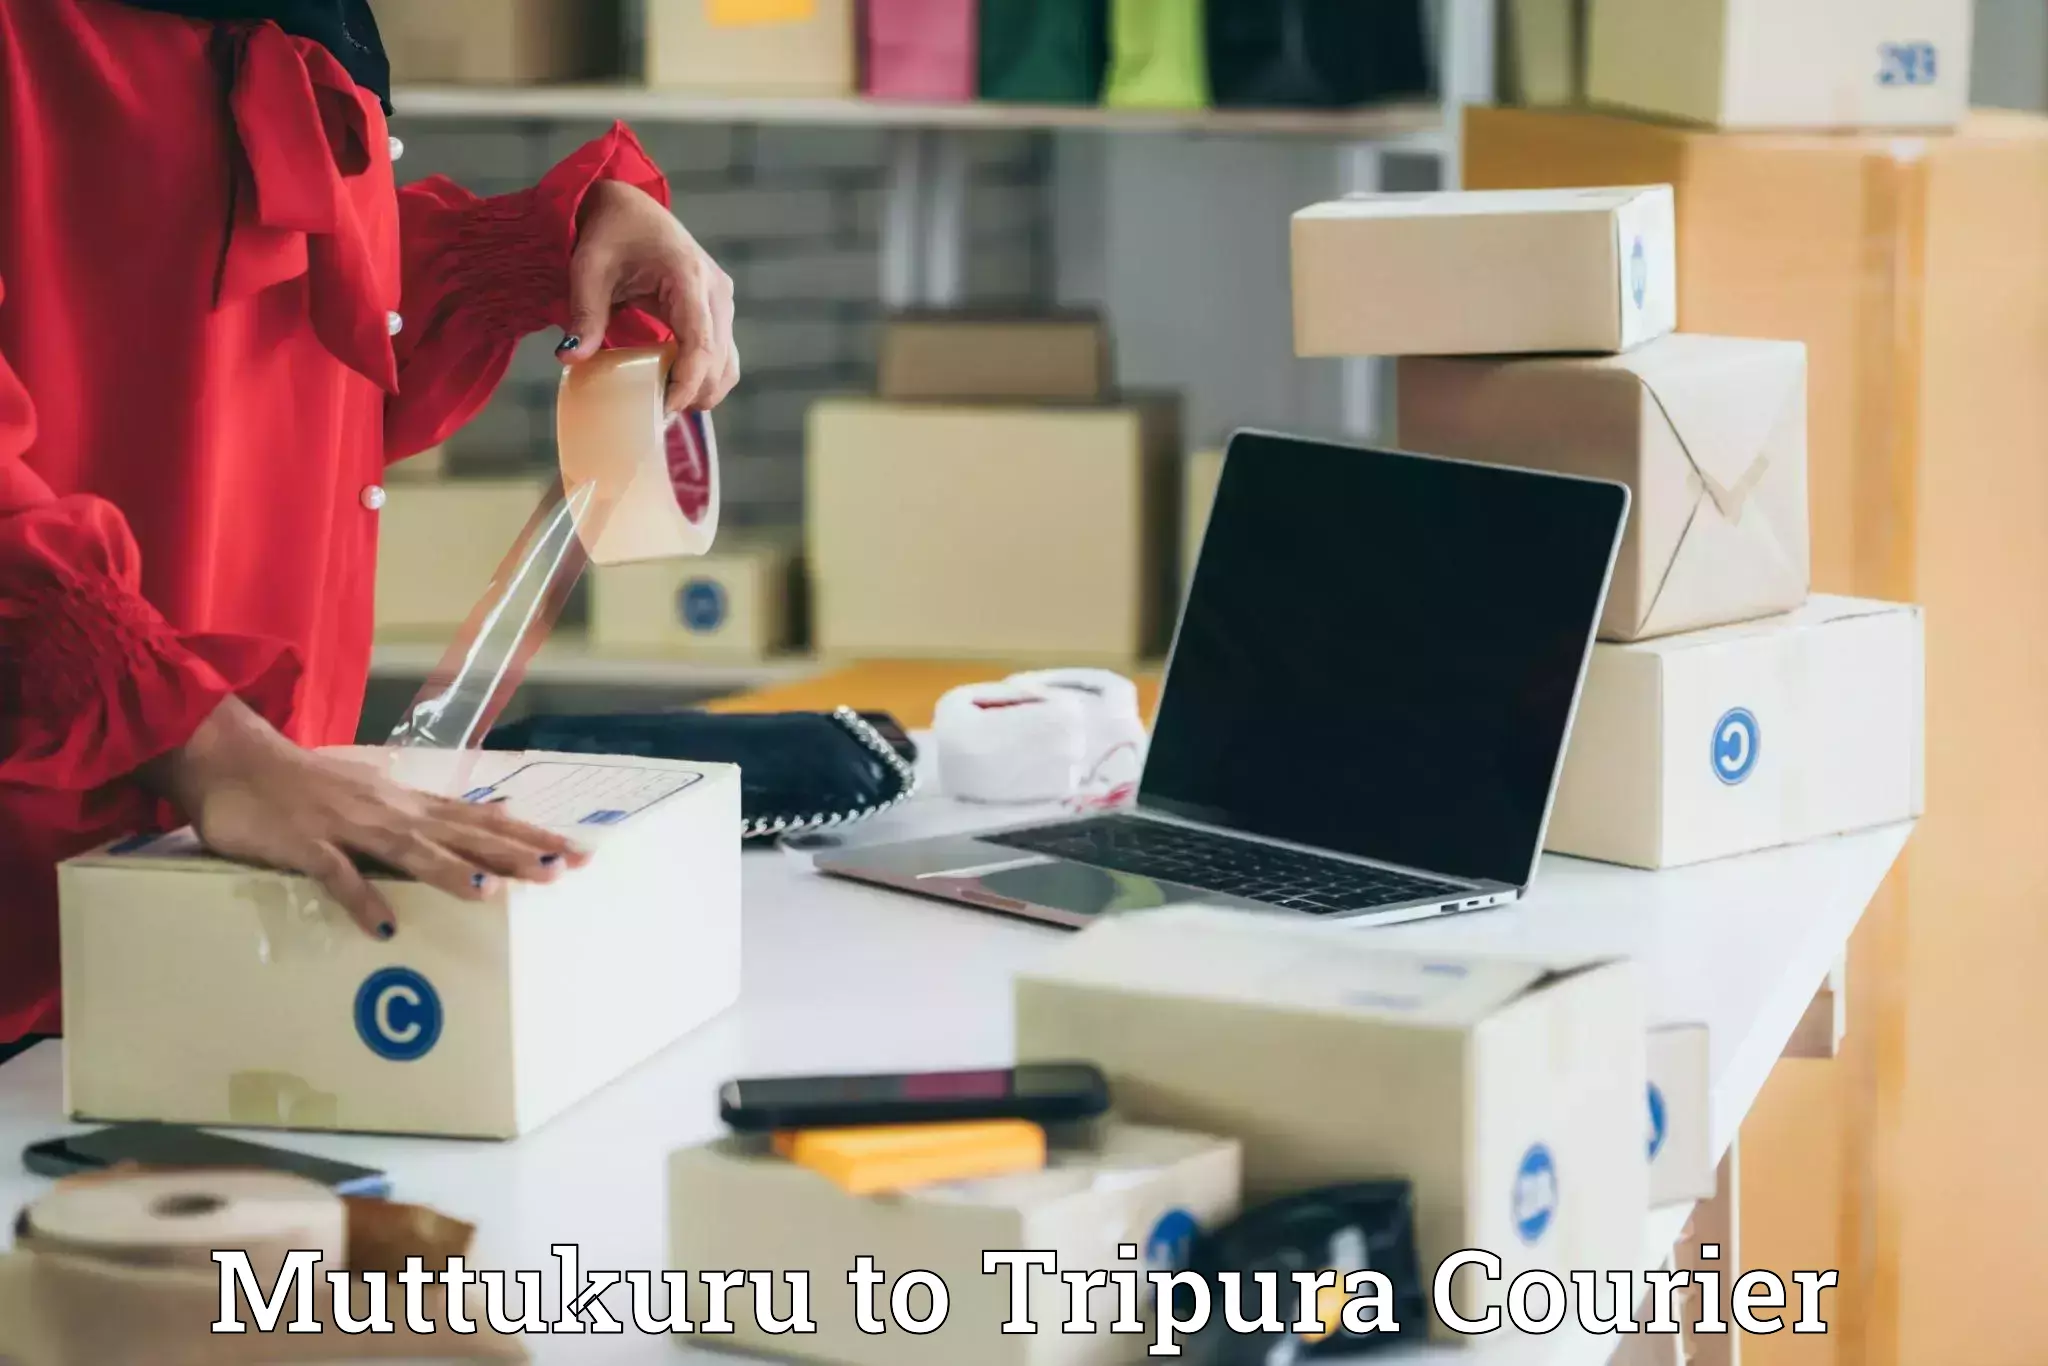 Quality courier services in Muttukuru to Aambasa